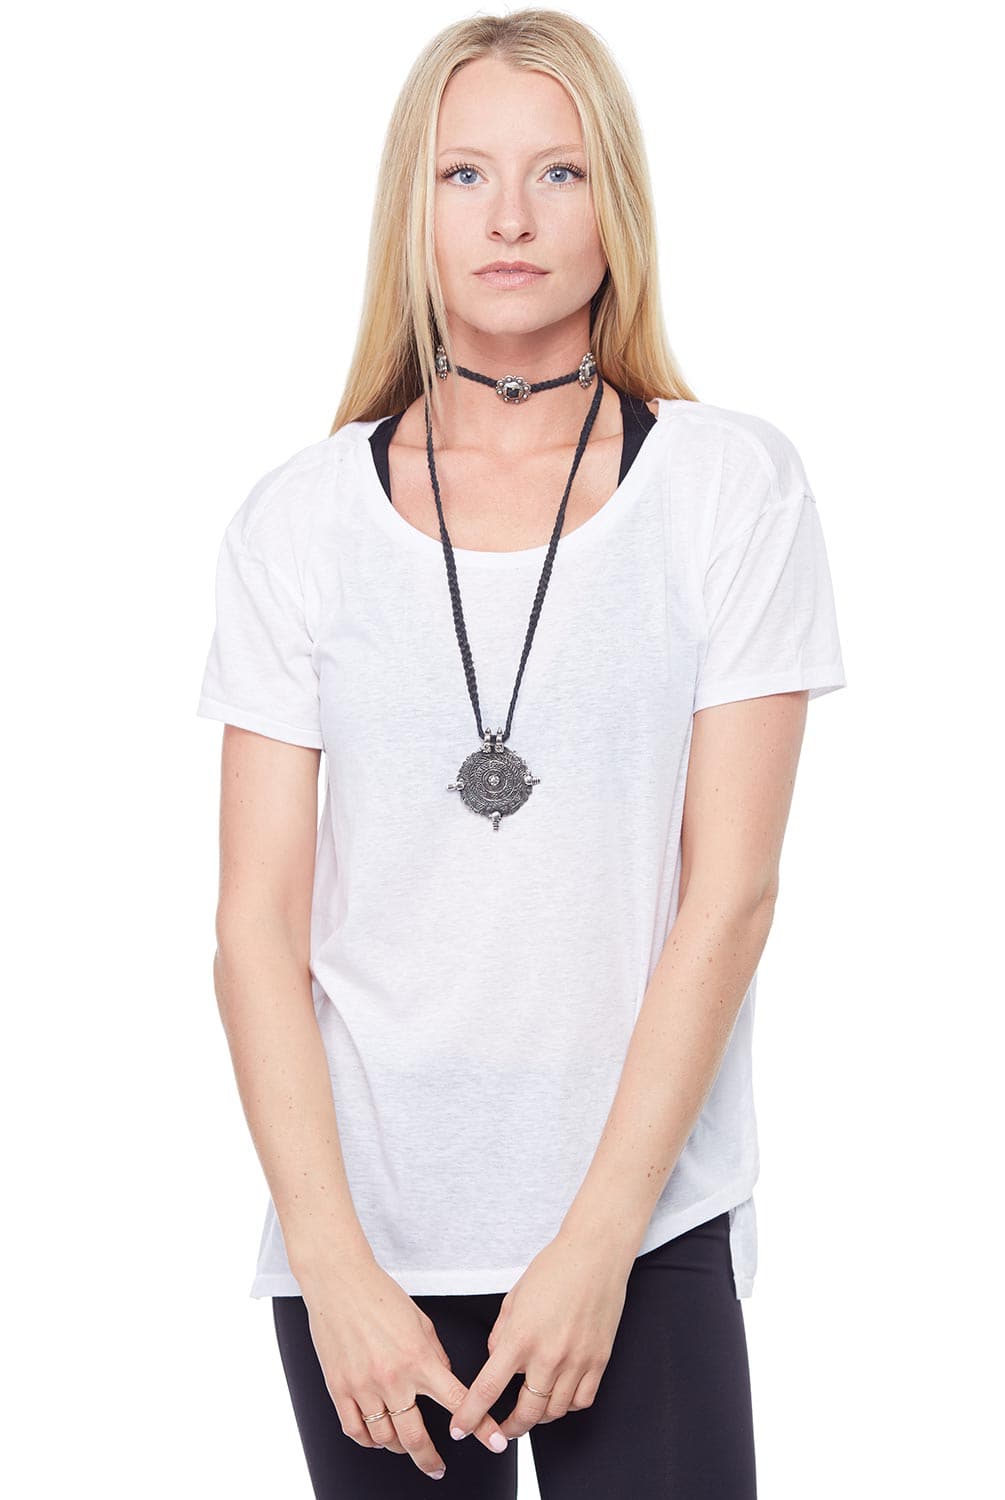 Frasier Sterling Jewelry Wanted & Wild Necklace in Black